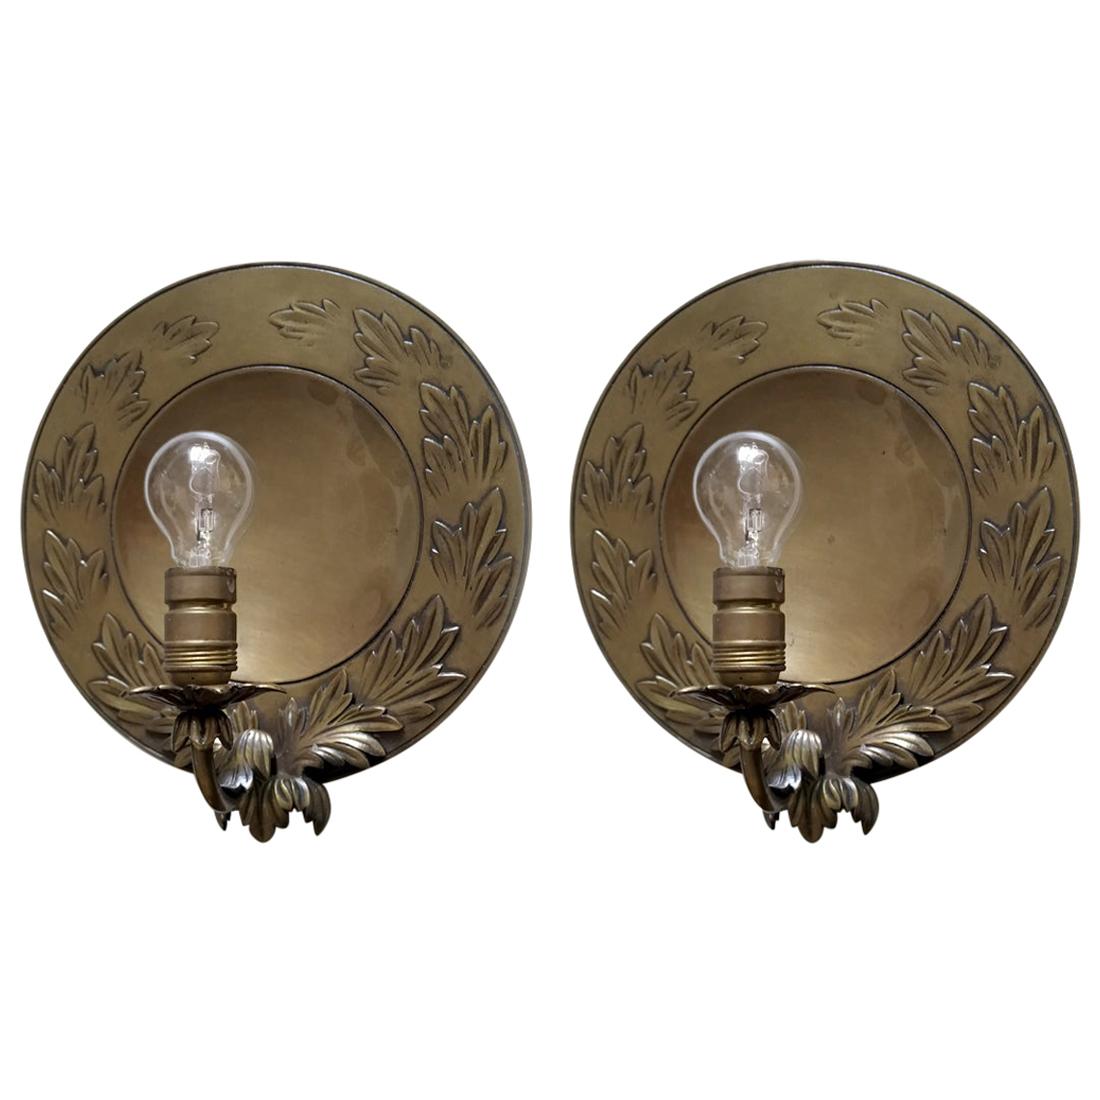 Pair of French Empire Vintage Wall Applique Lights Objects Sconces, 1920s For Sale